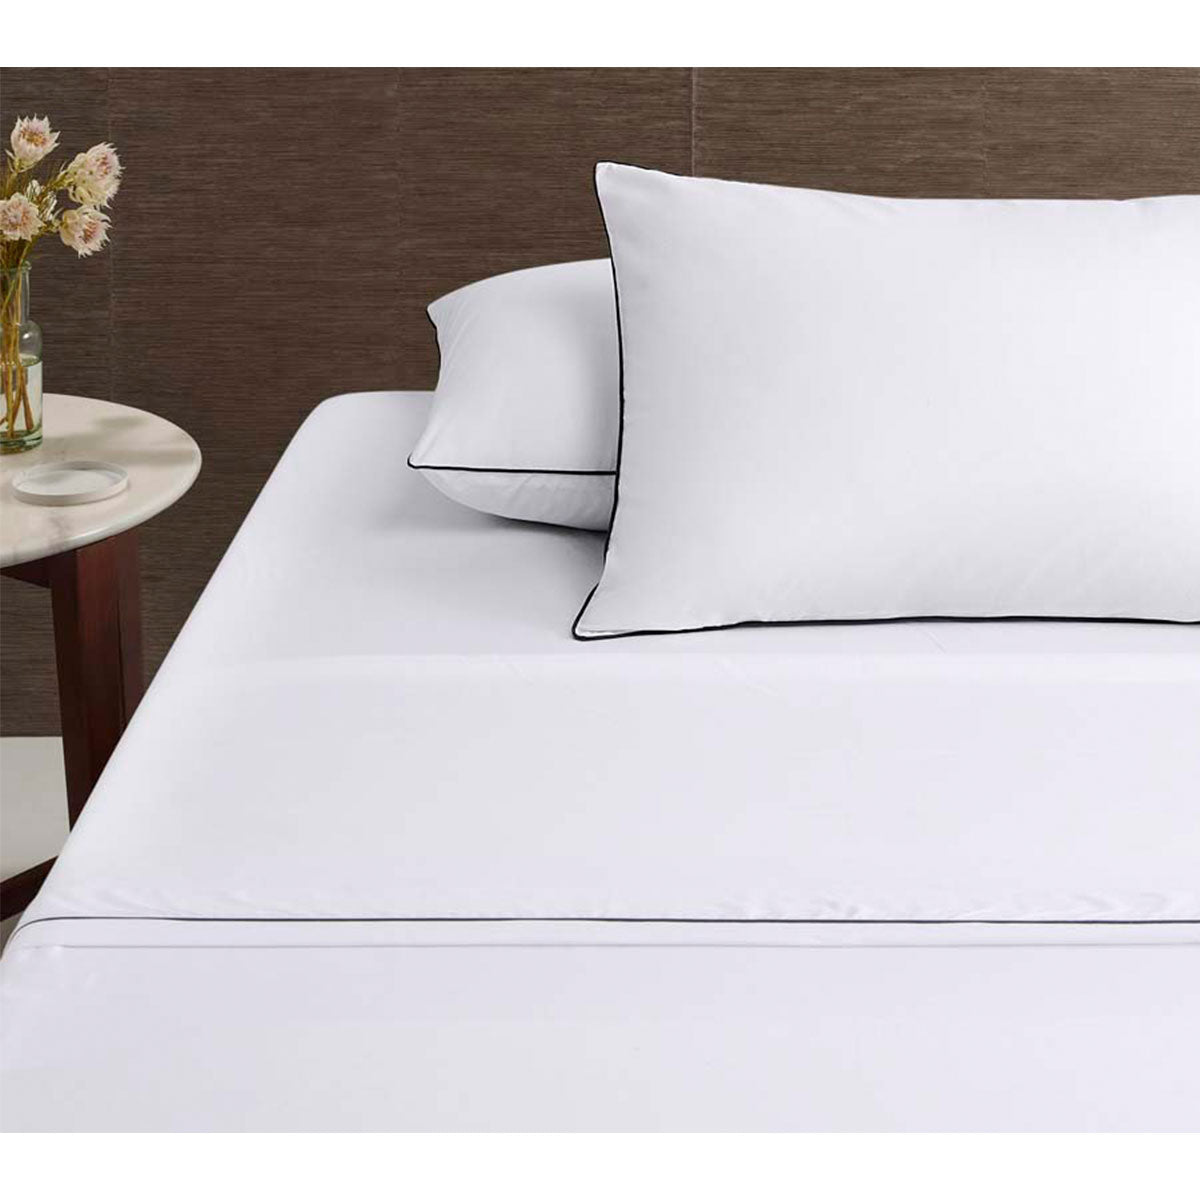 Accessorize White/Black Piped Hotel Deluxe Cotton Sheet Set - Queen | Elegant Bedding